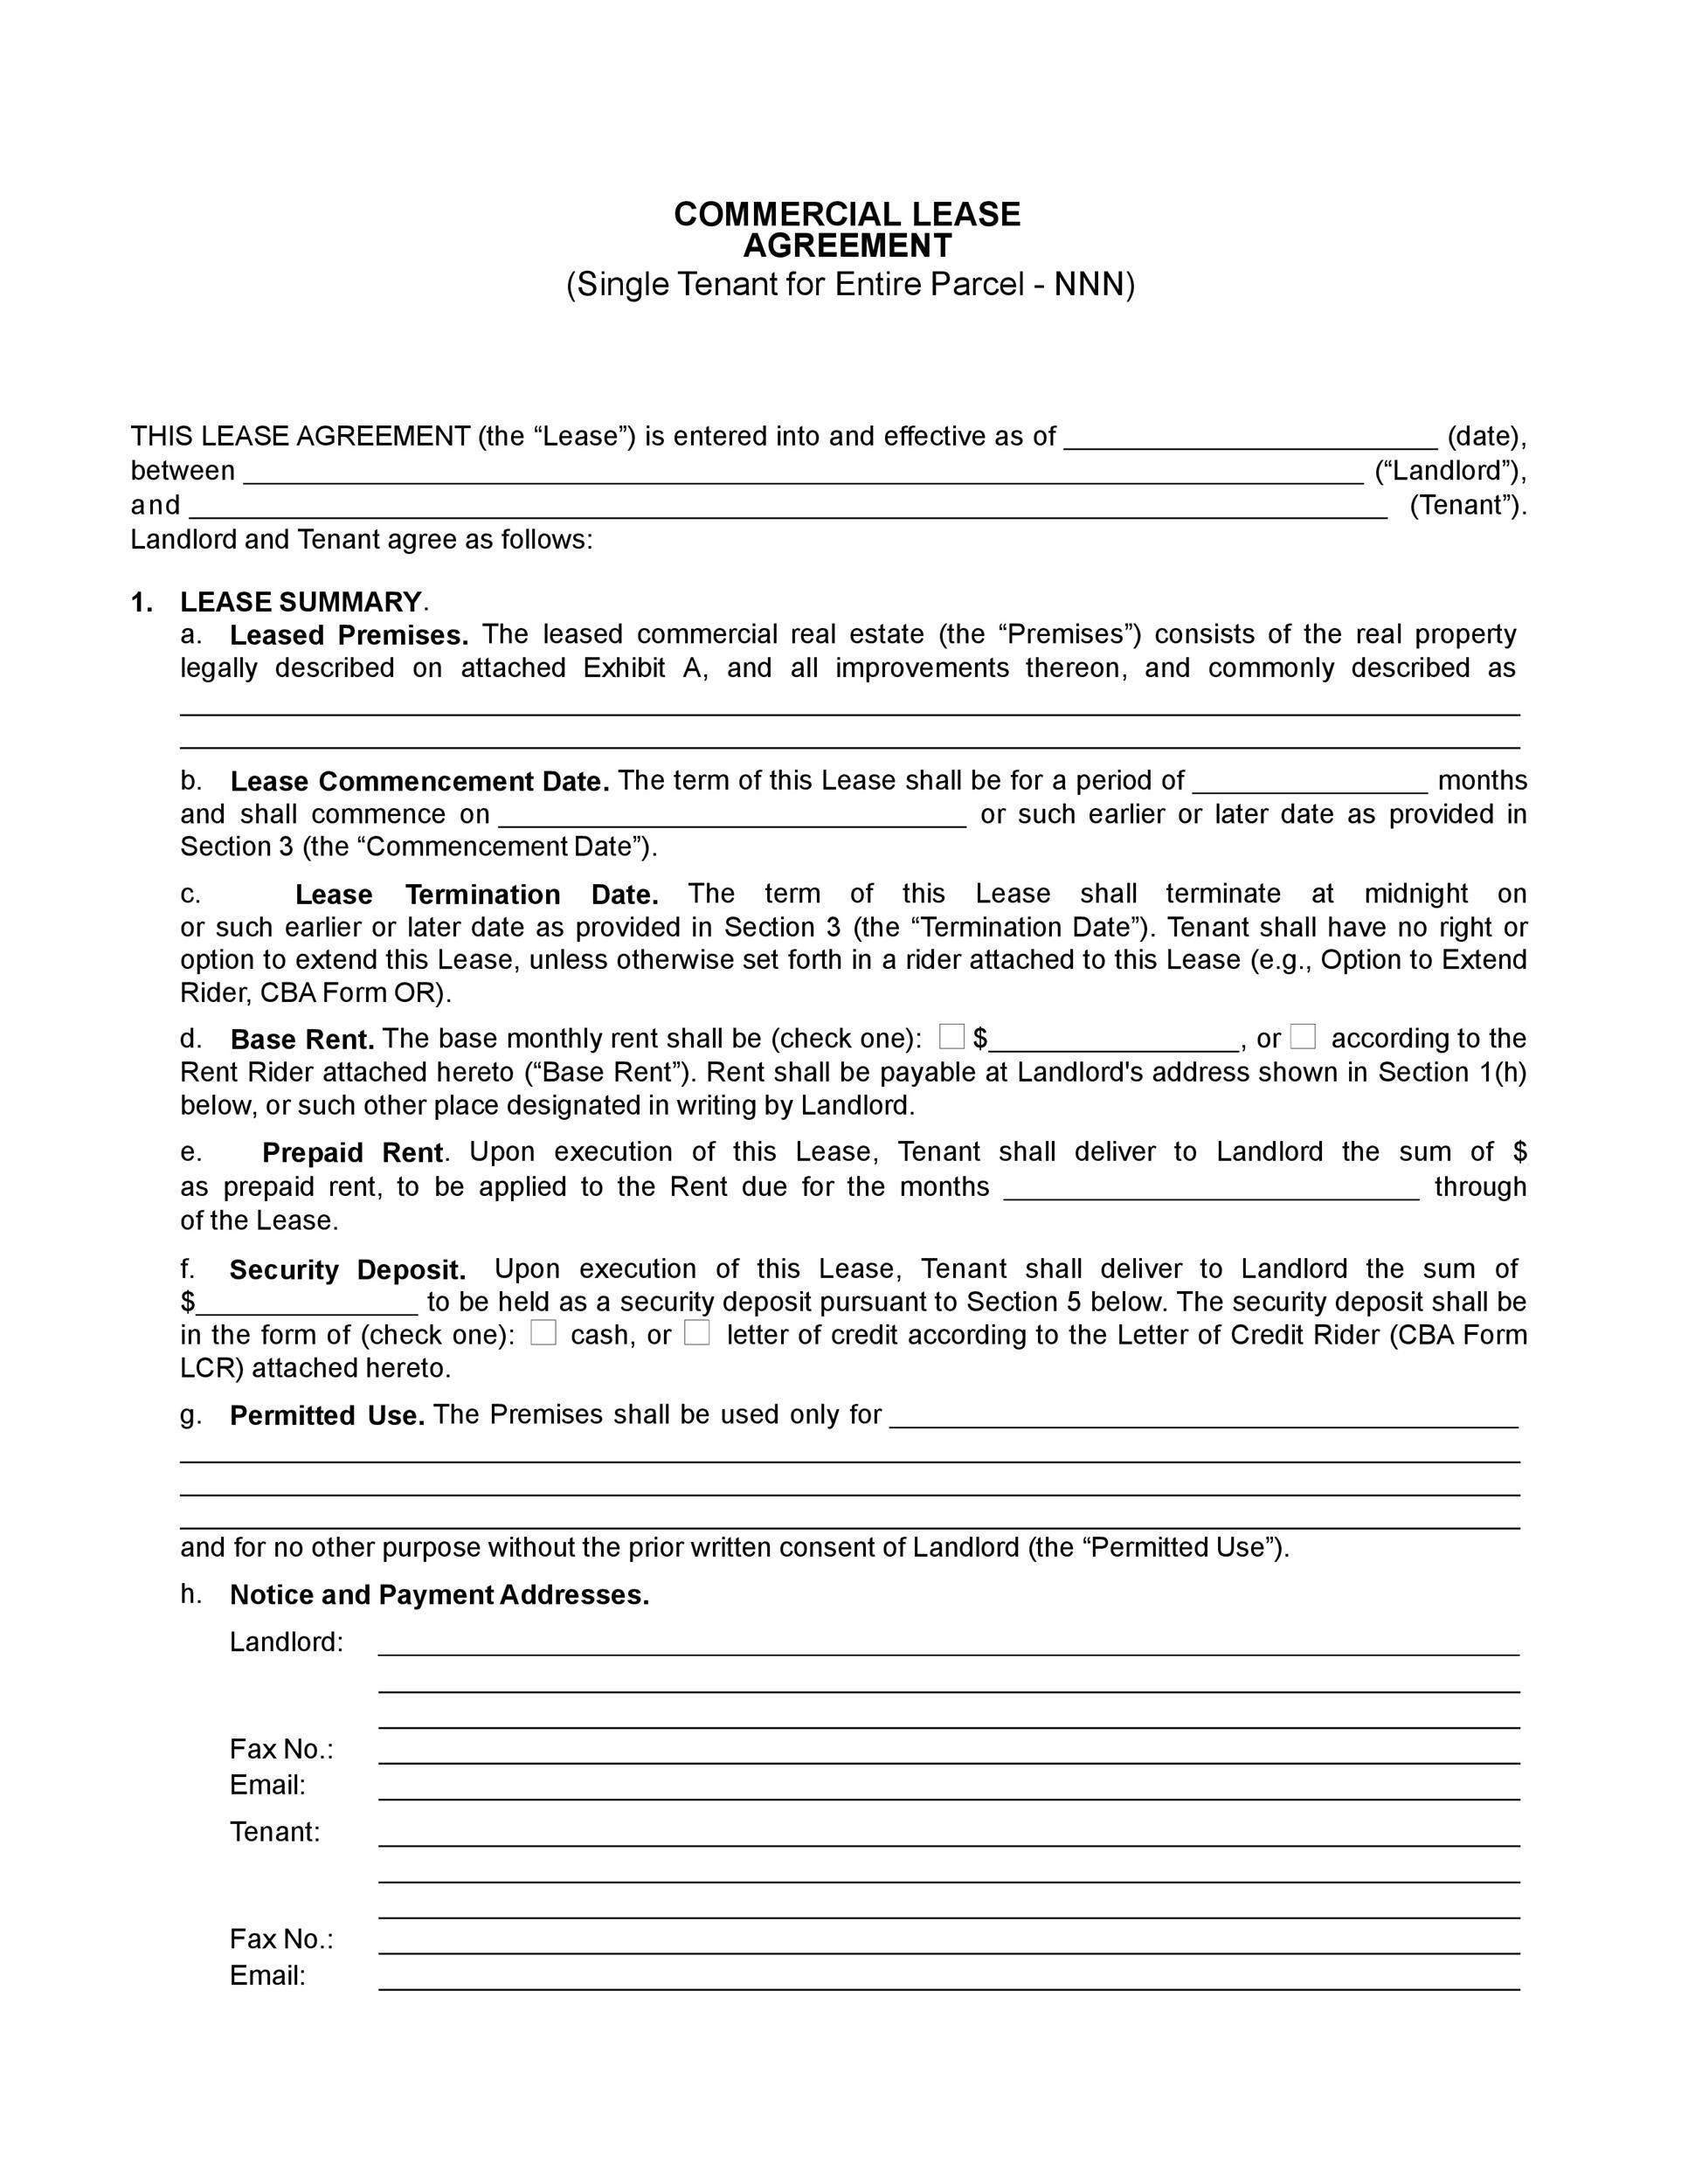 commercial-lease-agreement-form-pdf-printable